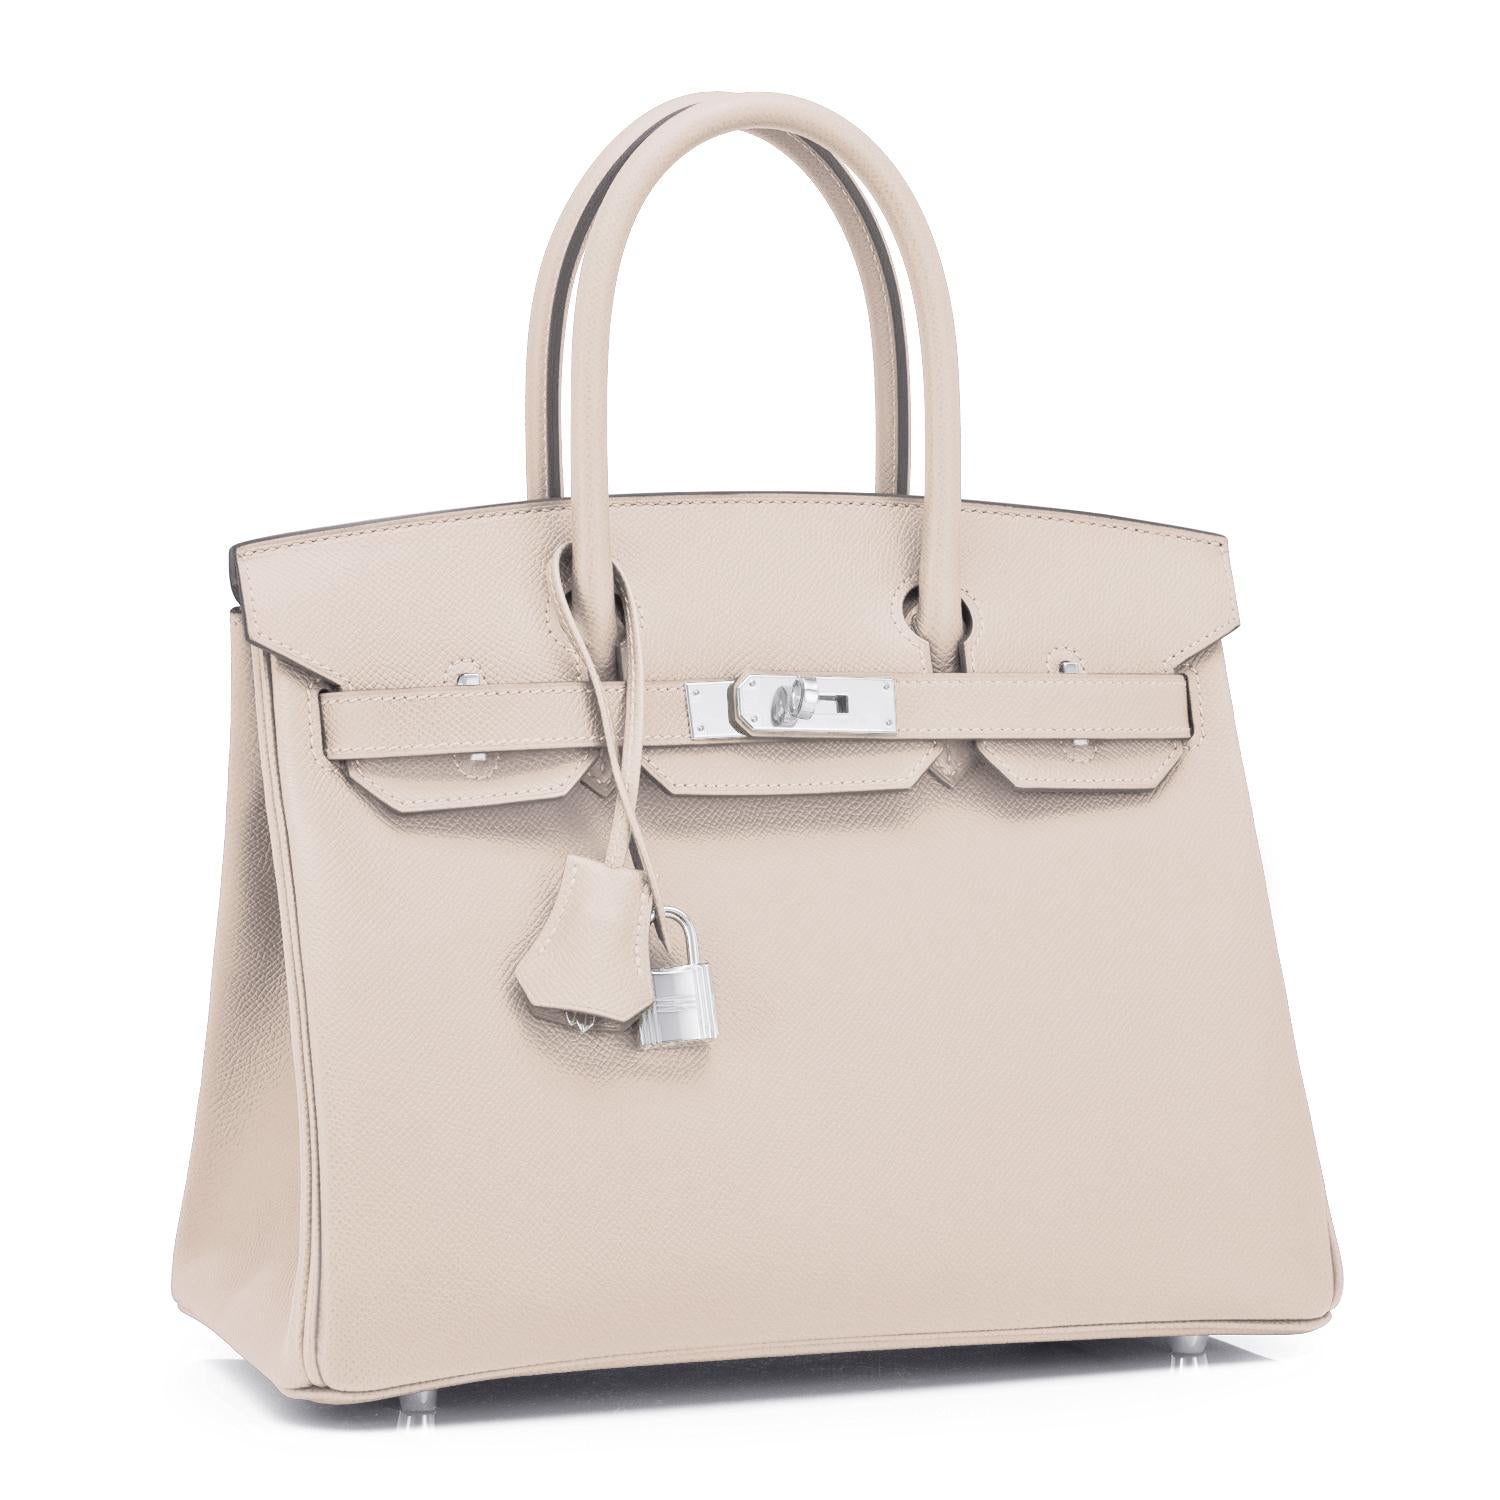 Hermes Birkin 30cm Craie Off White Epsom Palladium Hardware Y Stamp, 2020
Just purchased from Hermes store; bag bears new 2020 interior Y Stamp.
Brand New in Box. Store Fresh. Pristine Condition (with plastic on hardware)
Perfect gift! Comes in full